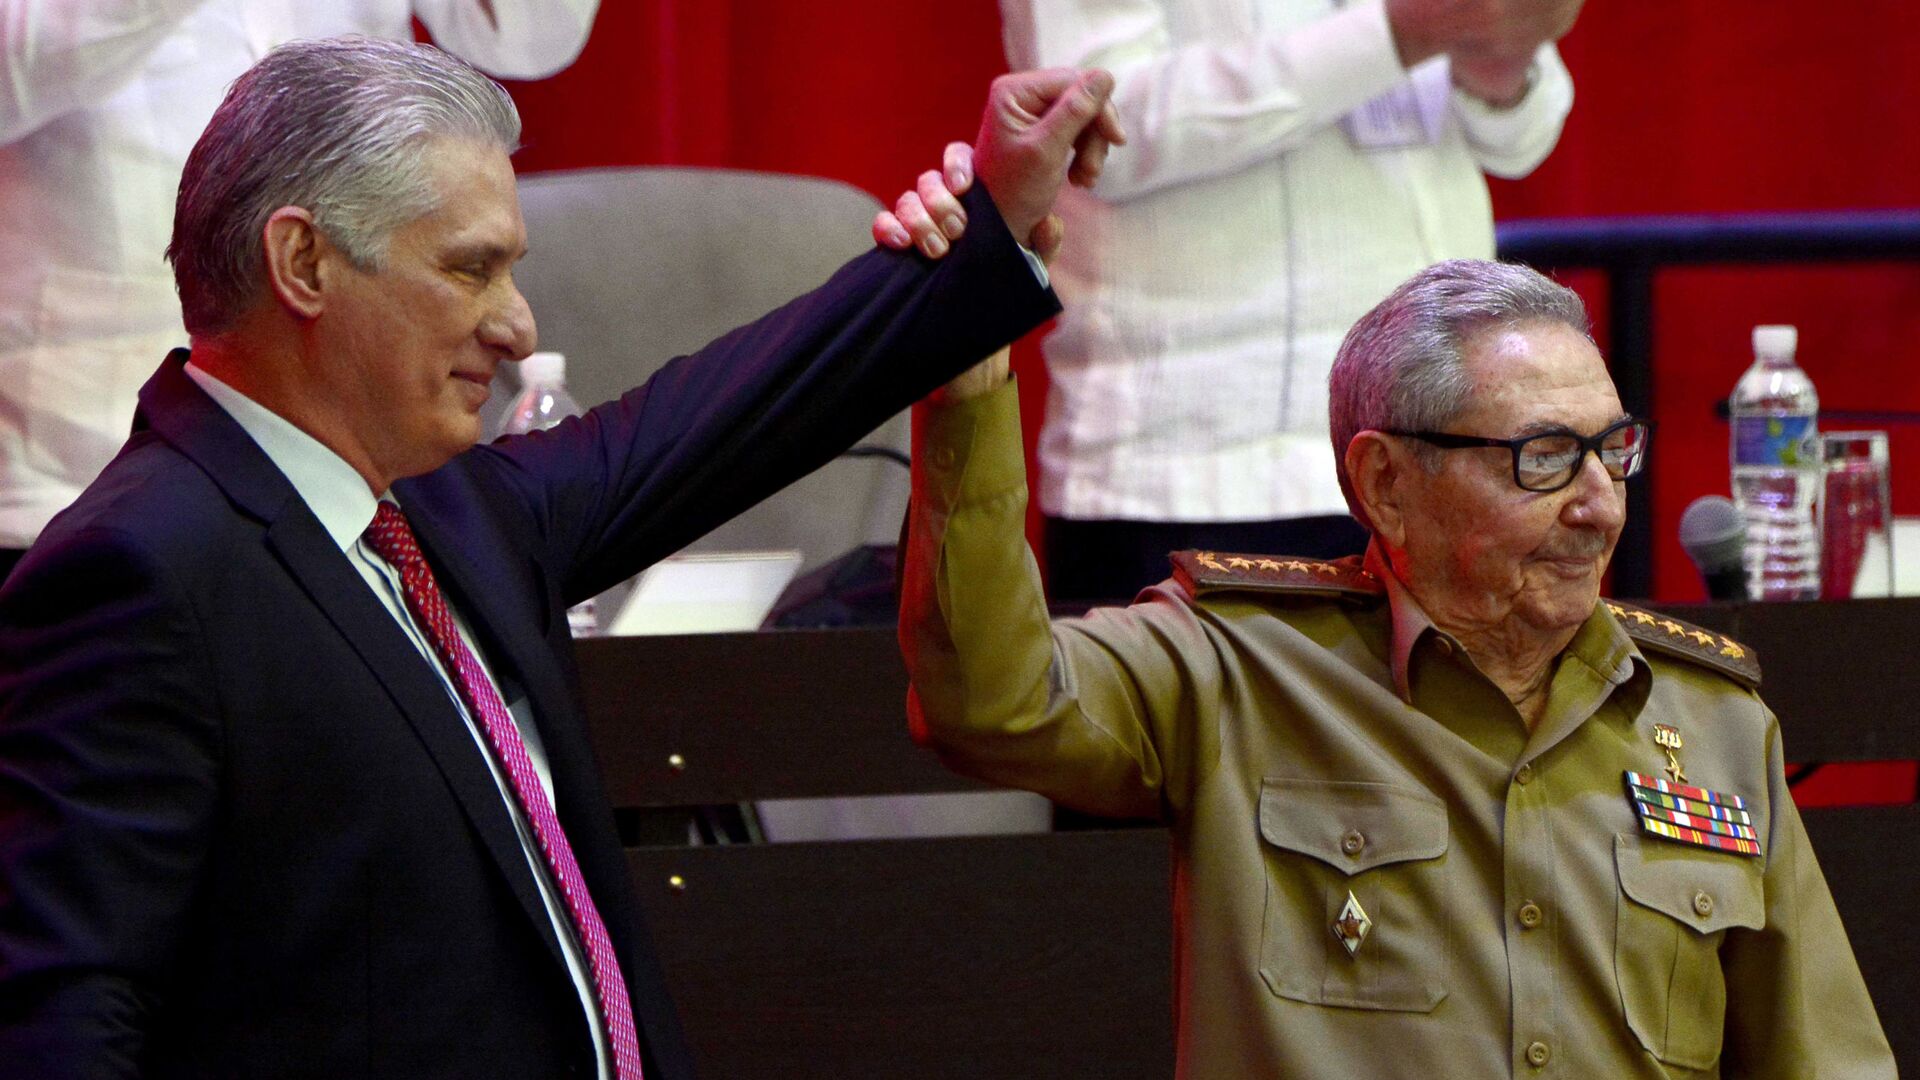 Raul Castro, right, raises the hand of Cuban President Miguel Diaz-Canel after Diaz-Canel was elected First Secretary of the Communist Party at the closing session of Cuban Communist Party's  8th Congress at the Convention Palace in Havana, Cuba, Monday, April 19, 2021. - Sputnik International, 1920, 11.07.2021